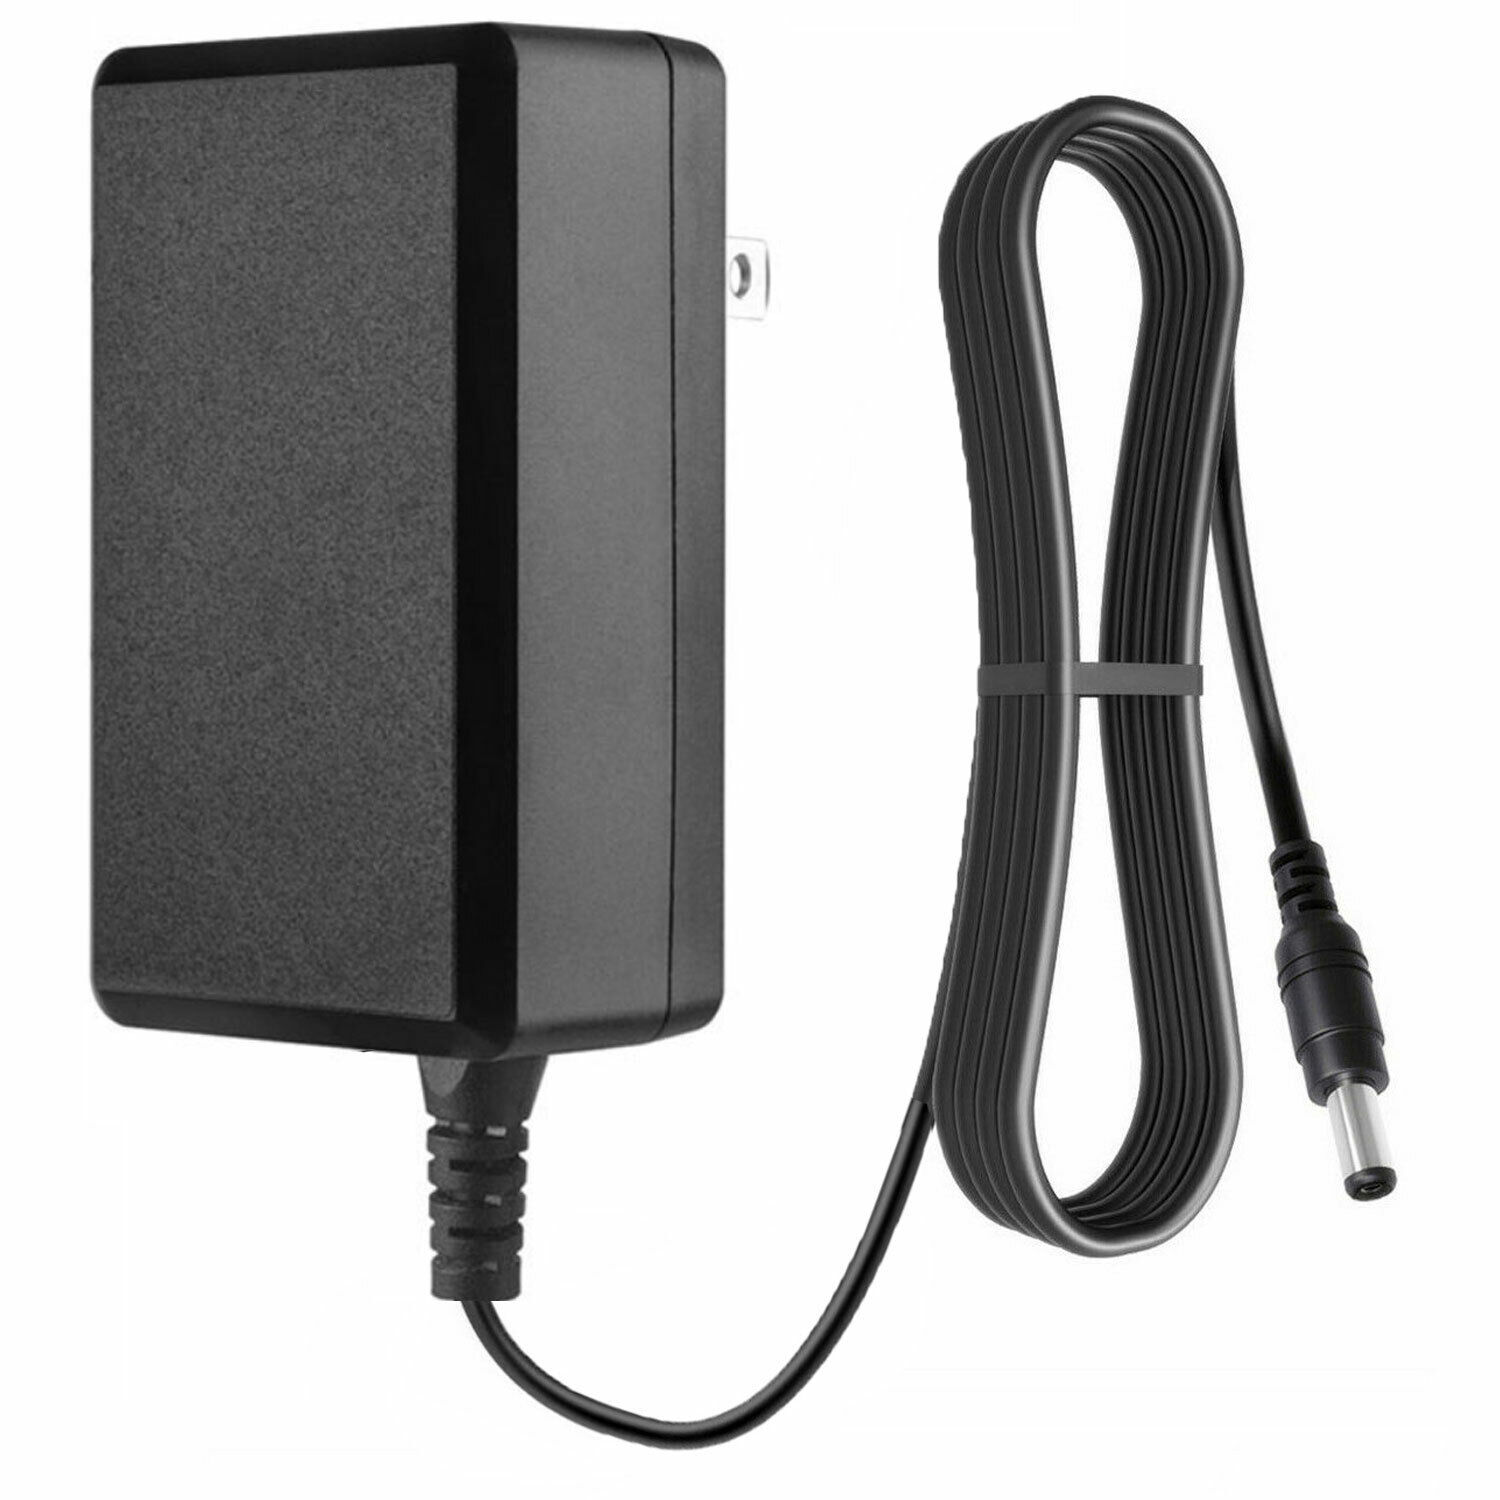 *Brand NEW*18Volt 1A US Wall Charger Center Negative 18V Guitar Effects Pedals AC Adapter DC Power Supply